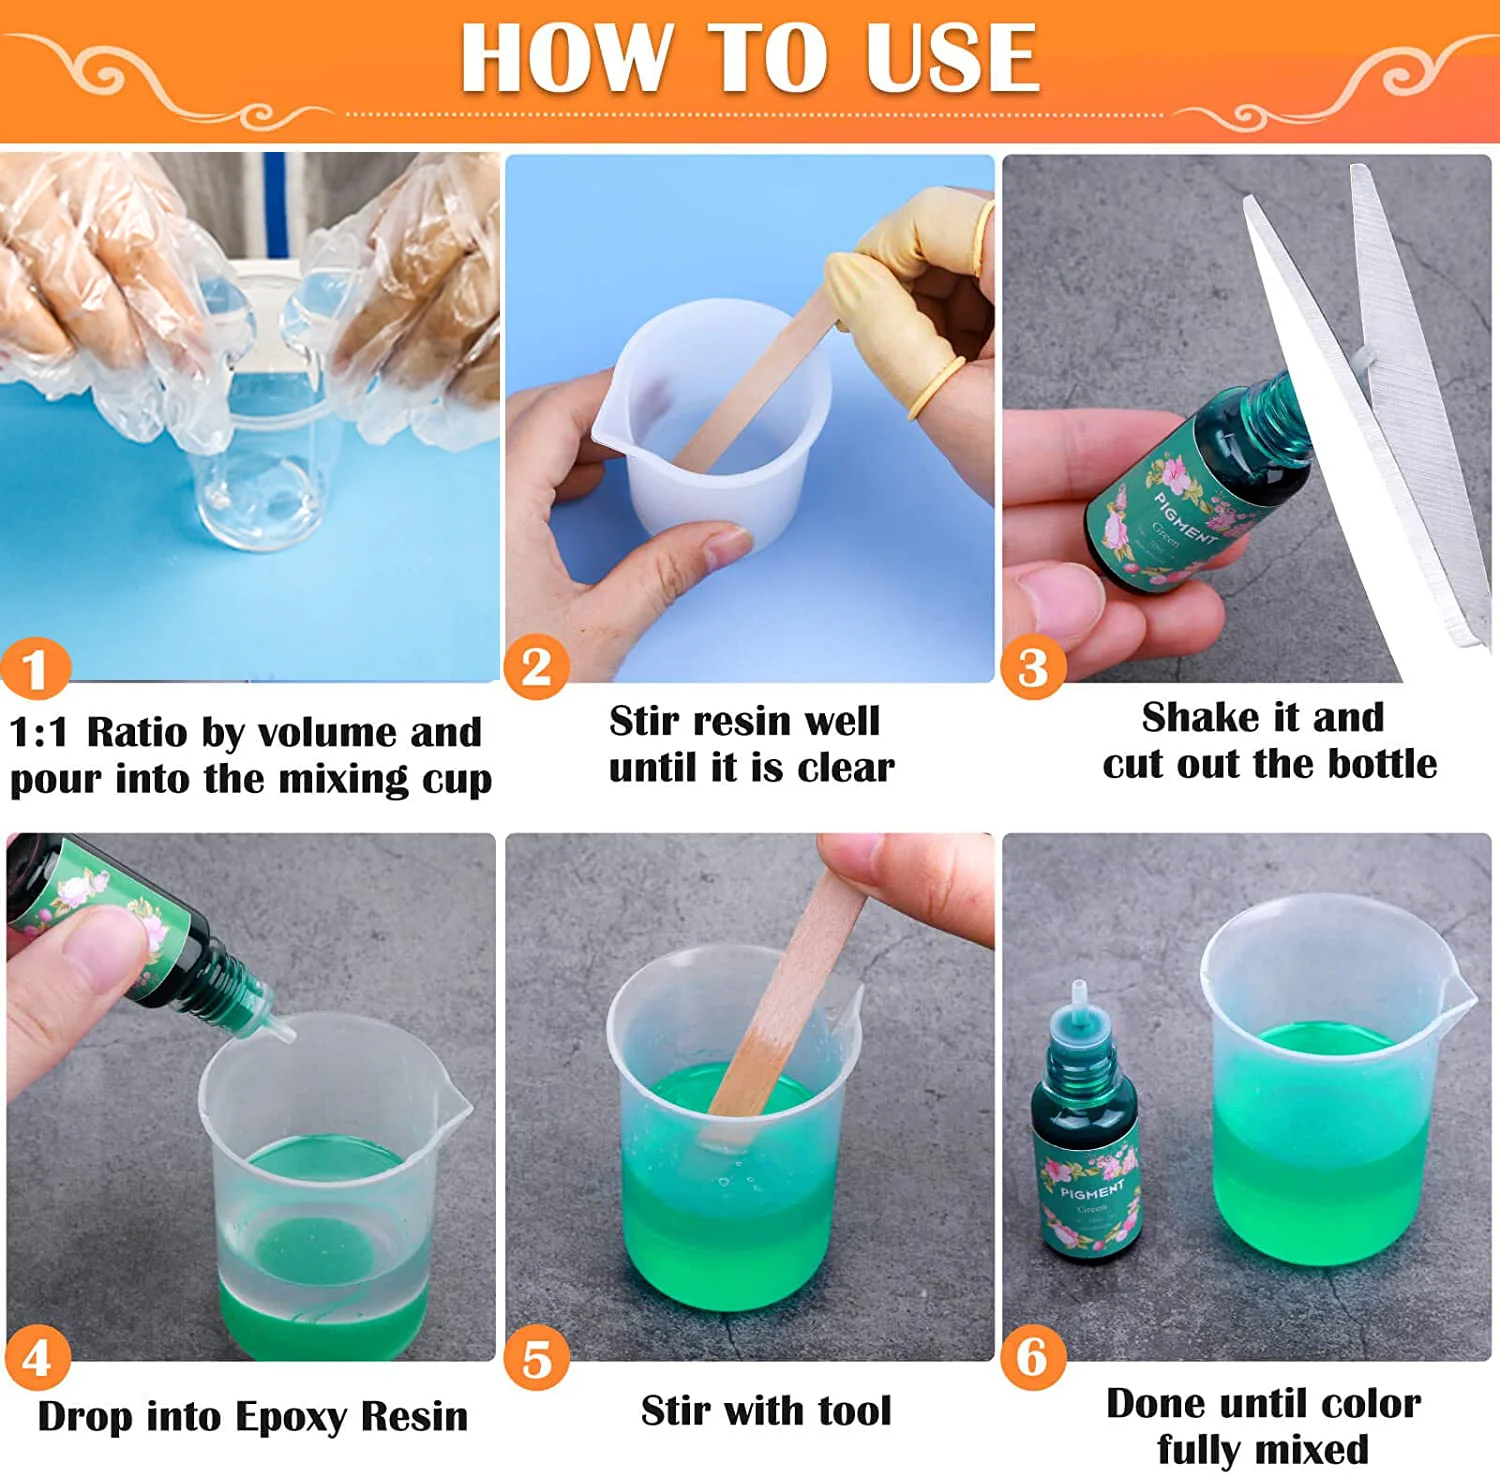 Clear Casting and Coating Epoxy Resin for Art- Easy Mix 1:1 Ratio - Easy Tint - Crystal Resin for Molds,River Tables